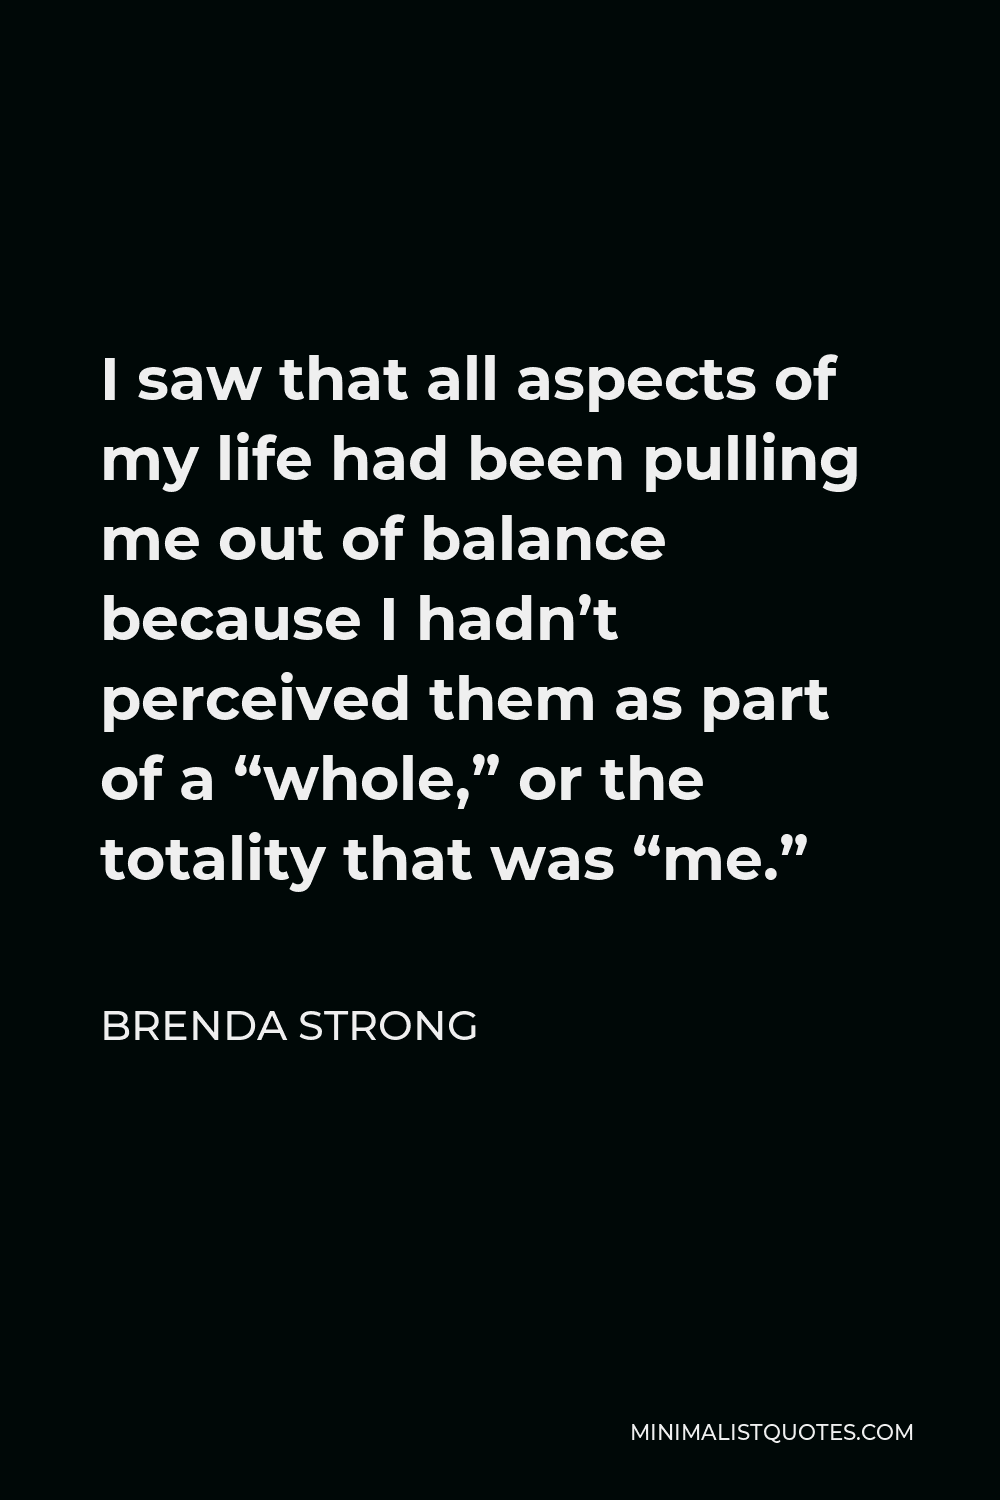 Brenda Strong Quote - I saw that all aspects of my life had been pulling me out of balance because I hadn’t perceived them as part of a “whole,” or the totality that was “me.”